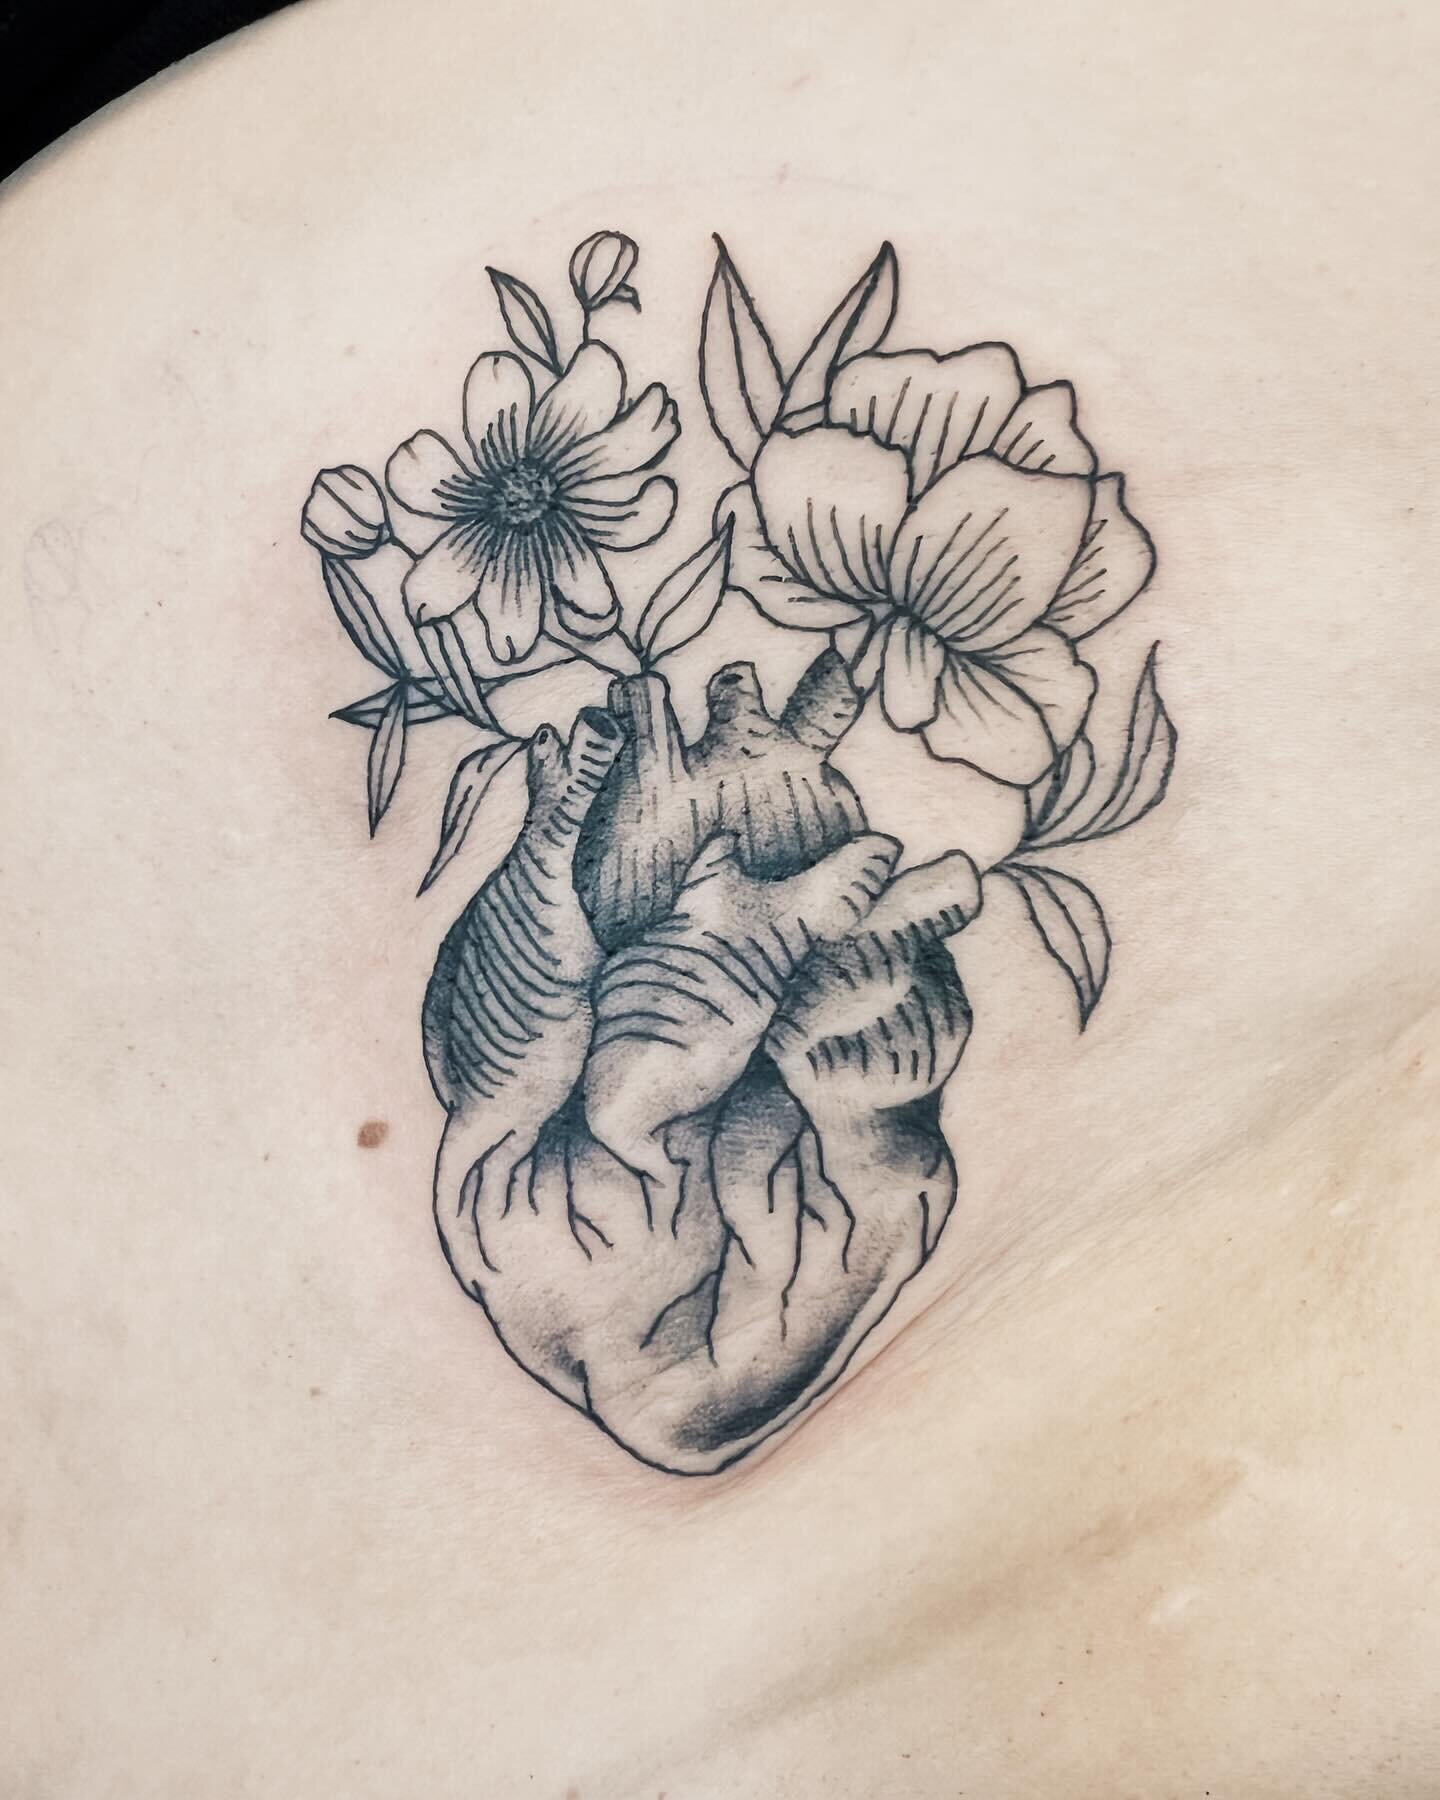 Blooming anatomical heart. 🫀🌸🌼@nrolbiecki thank you so much for giving me more space to practice and learn on you!
.
#learning #growing #tattooapprentice #anatomicalhearttattoo #florals